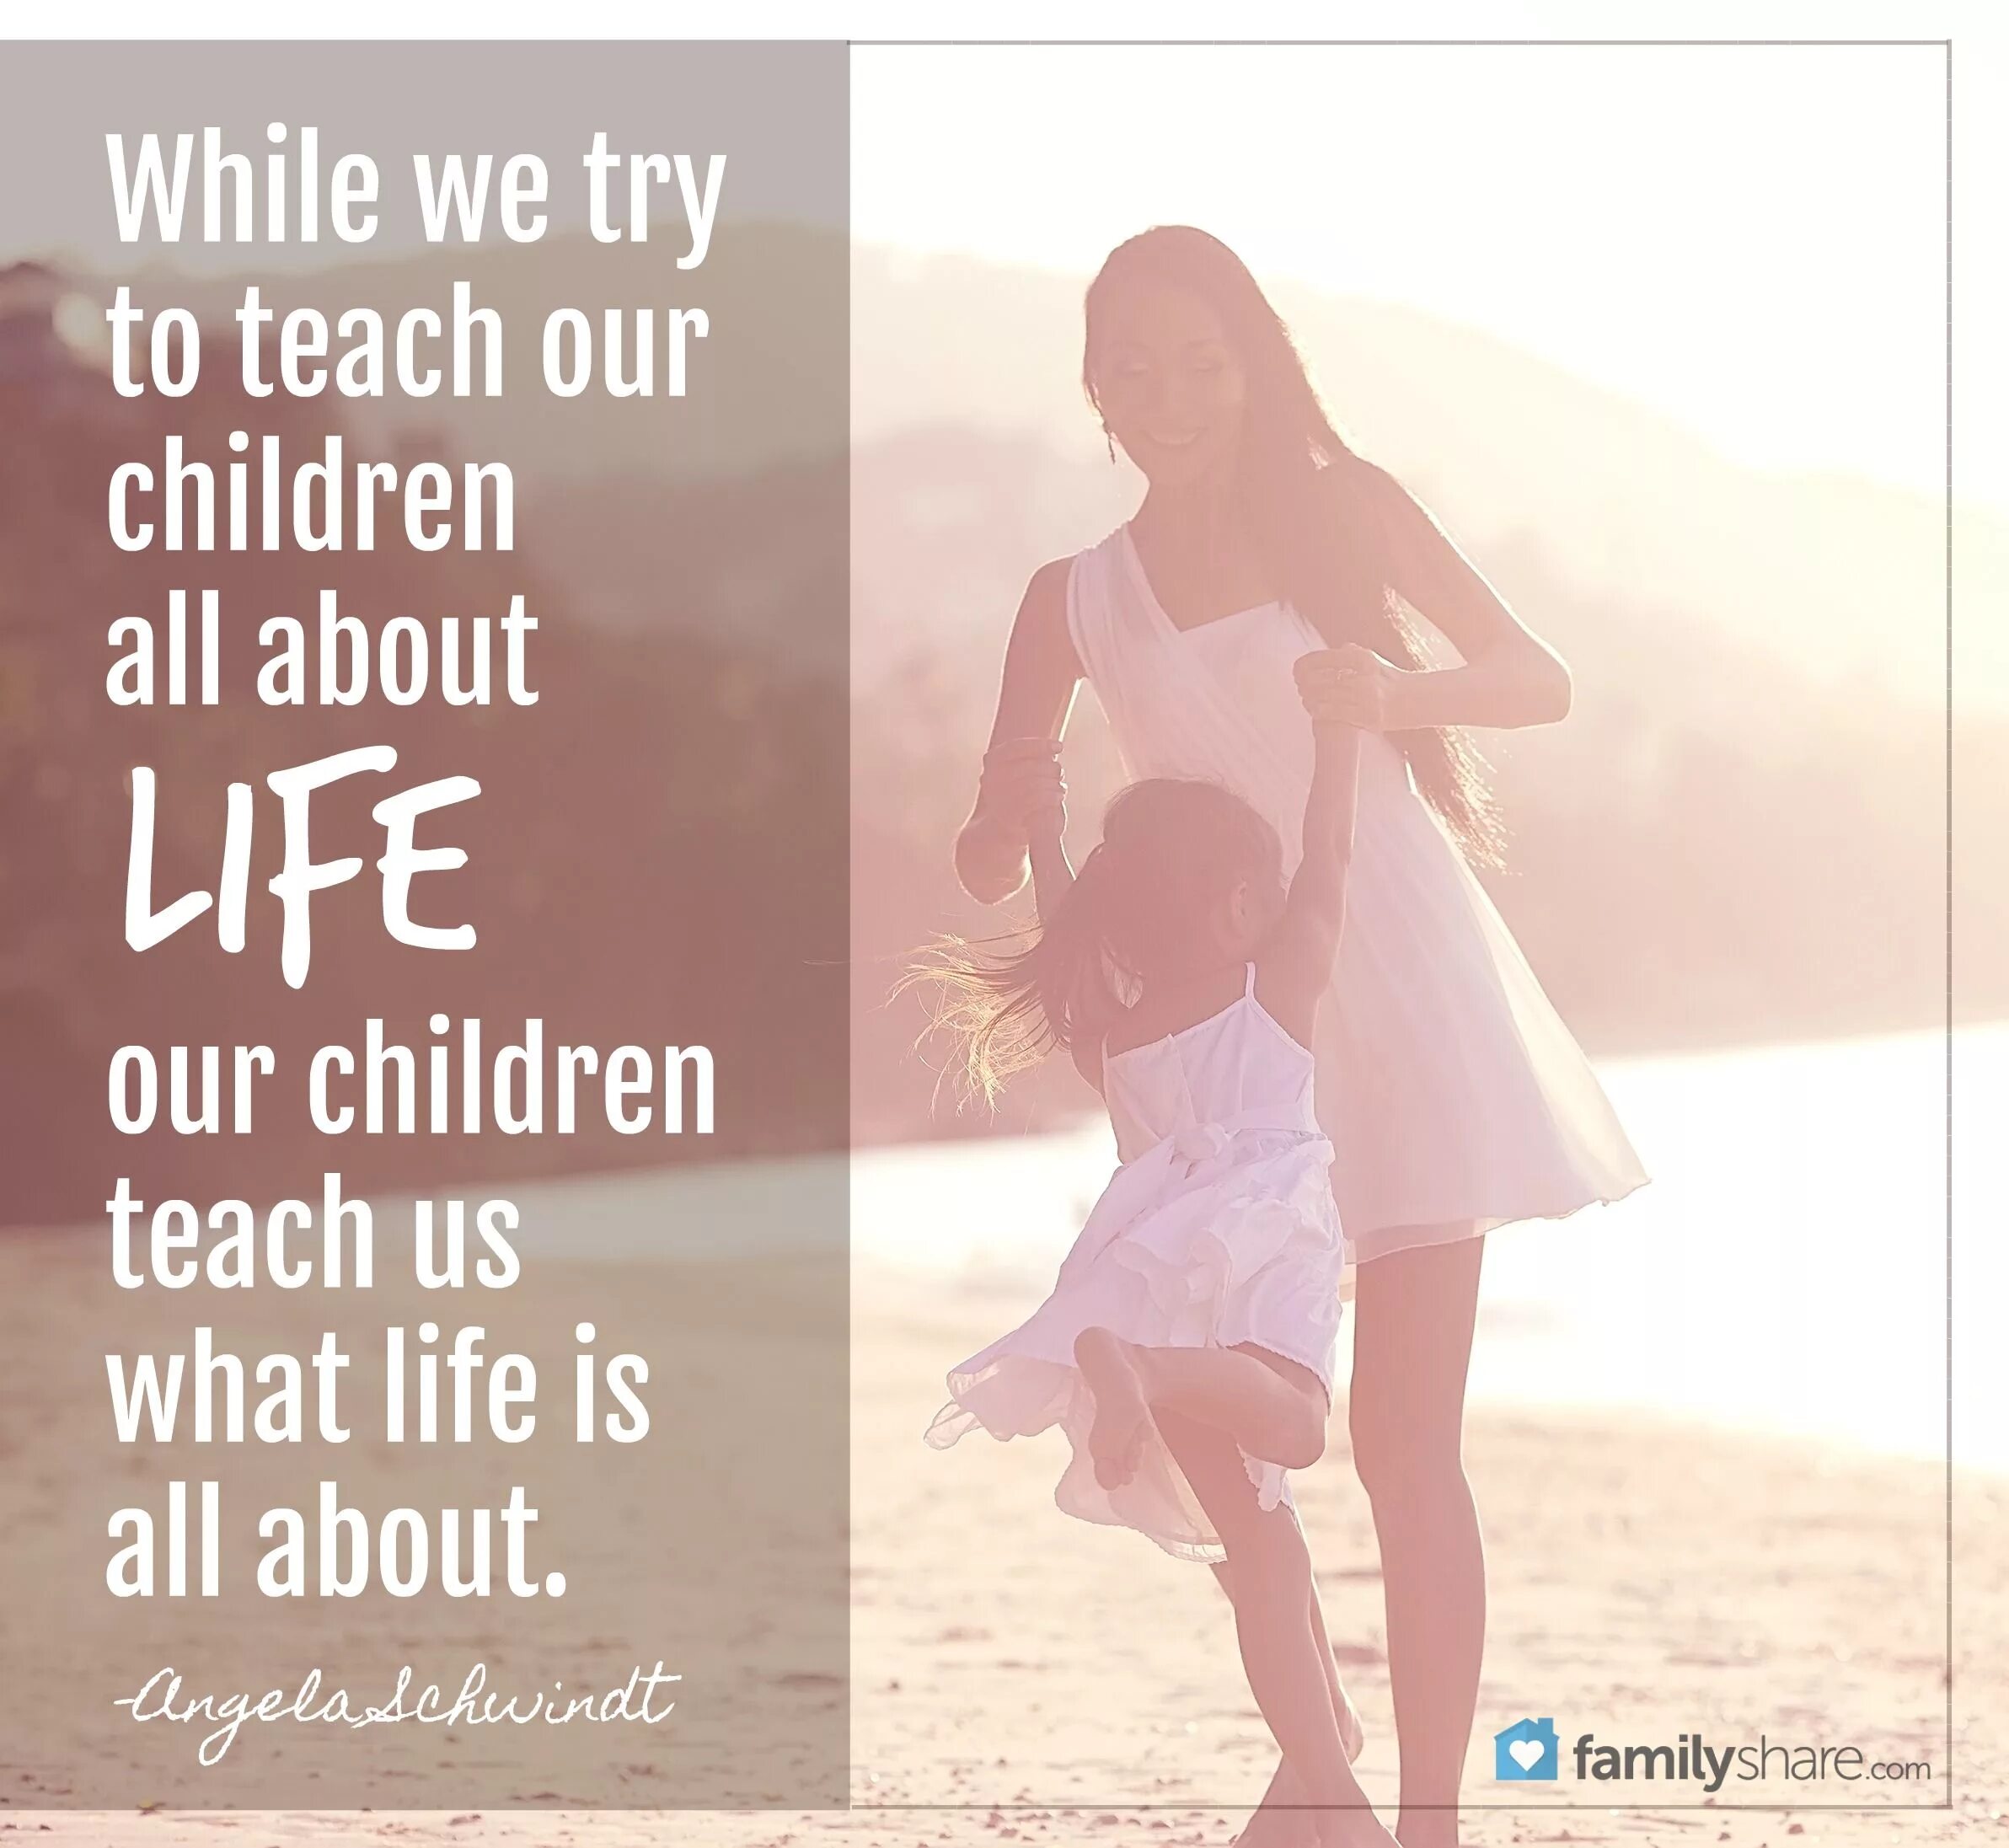 Our teacher to be happy if we. About teaching children quotes. Quotations about childhood. About teaching children quotes inspiring. We teach our children good Habits тест.